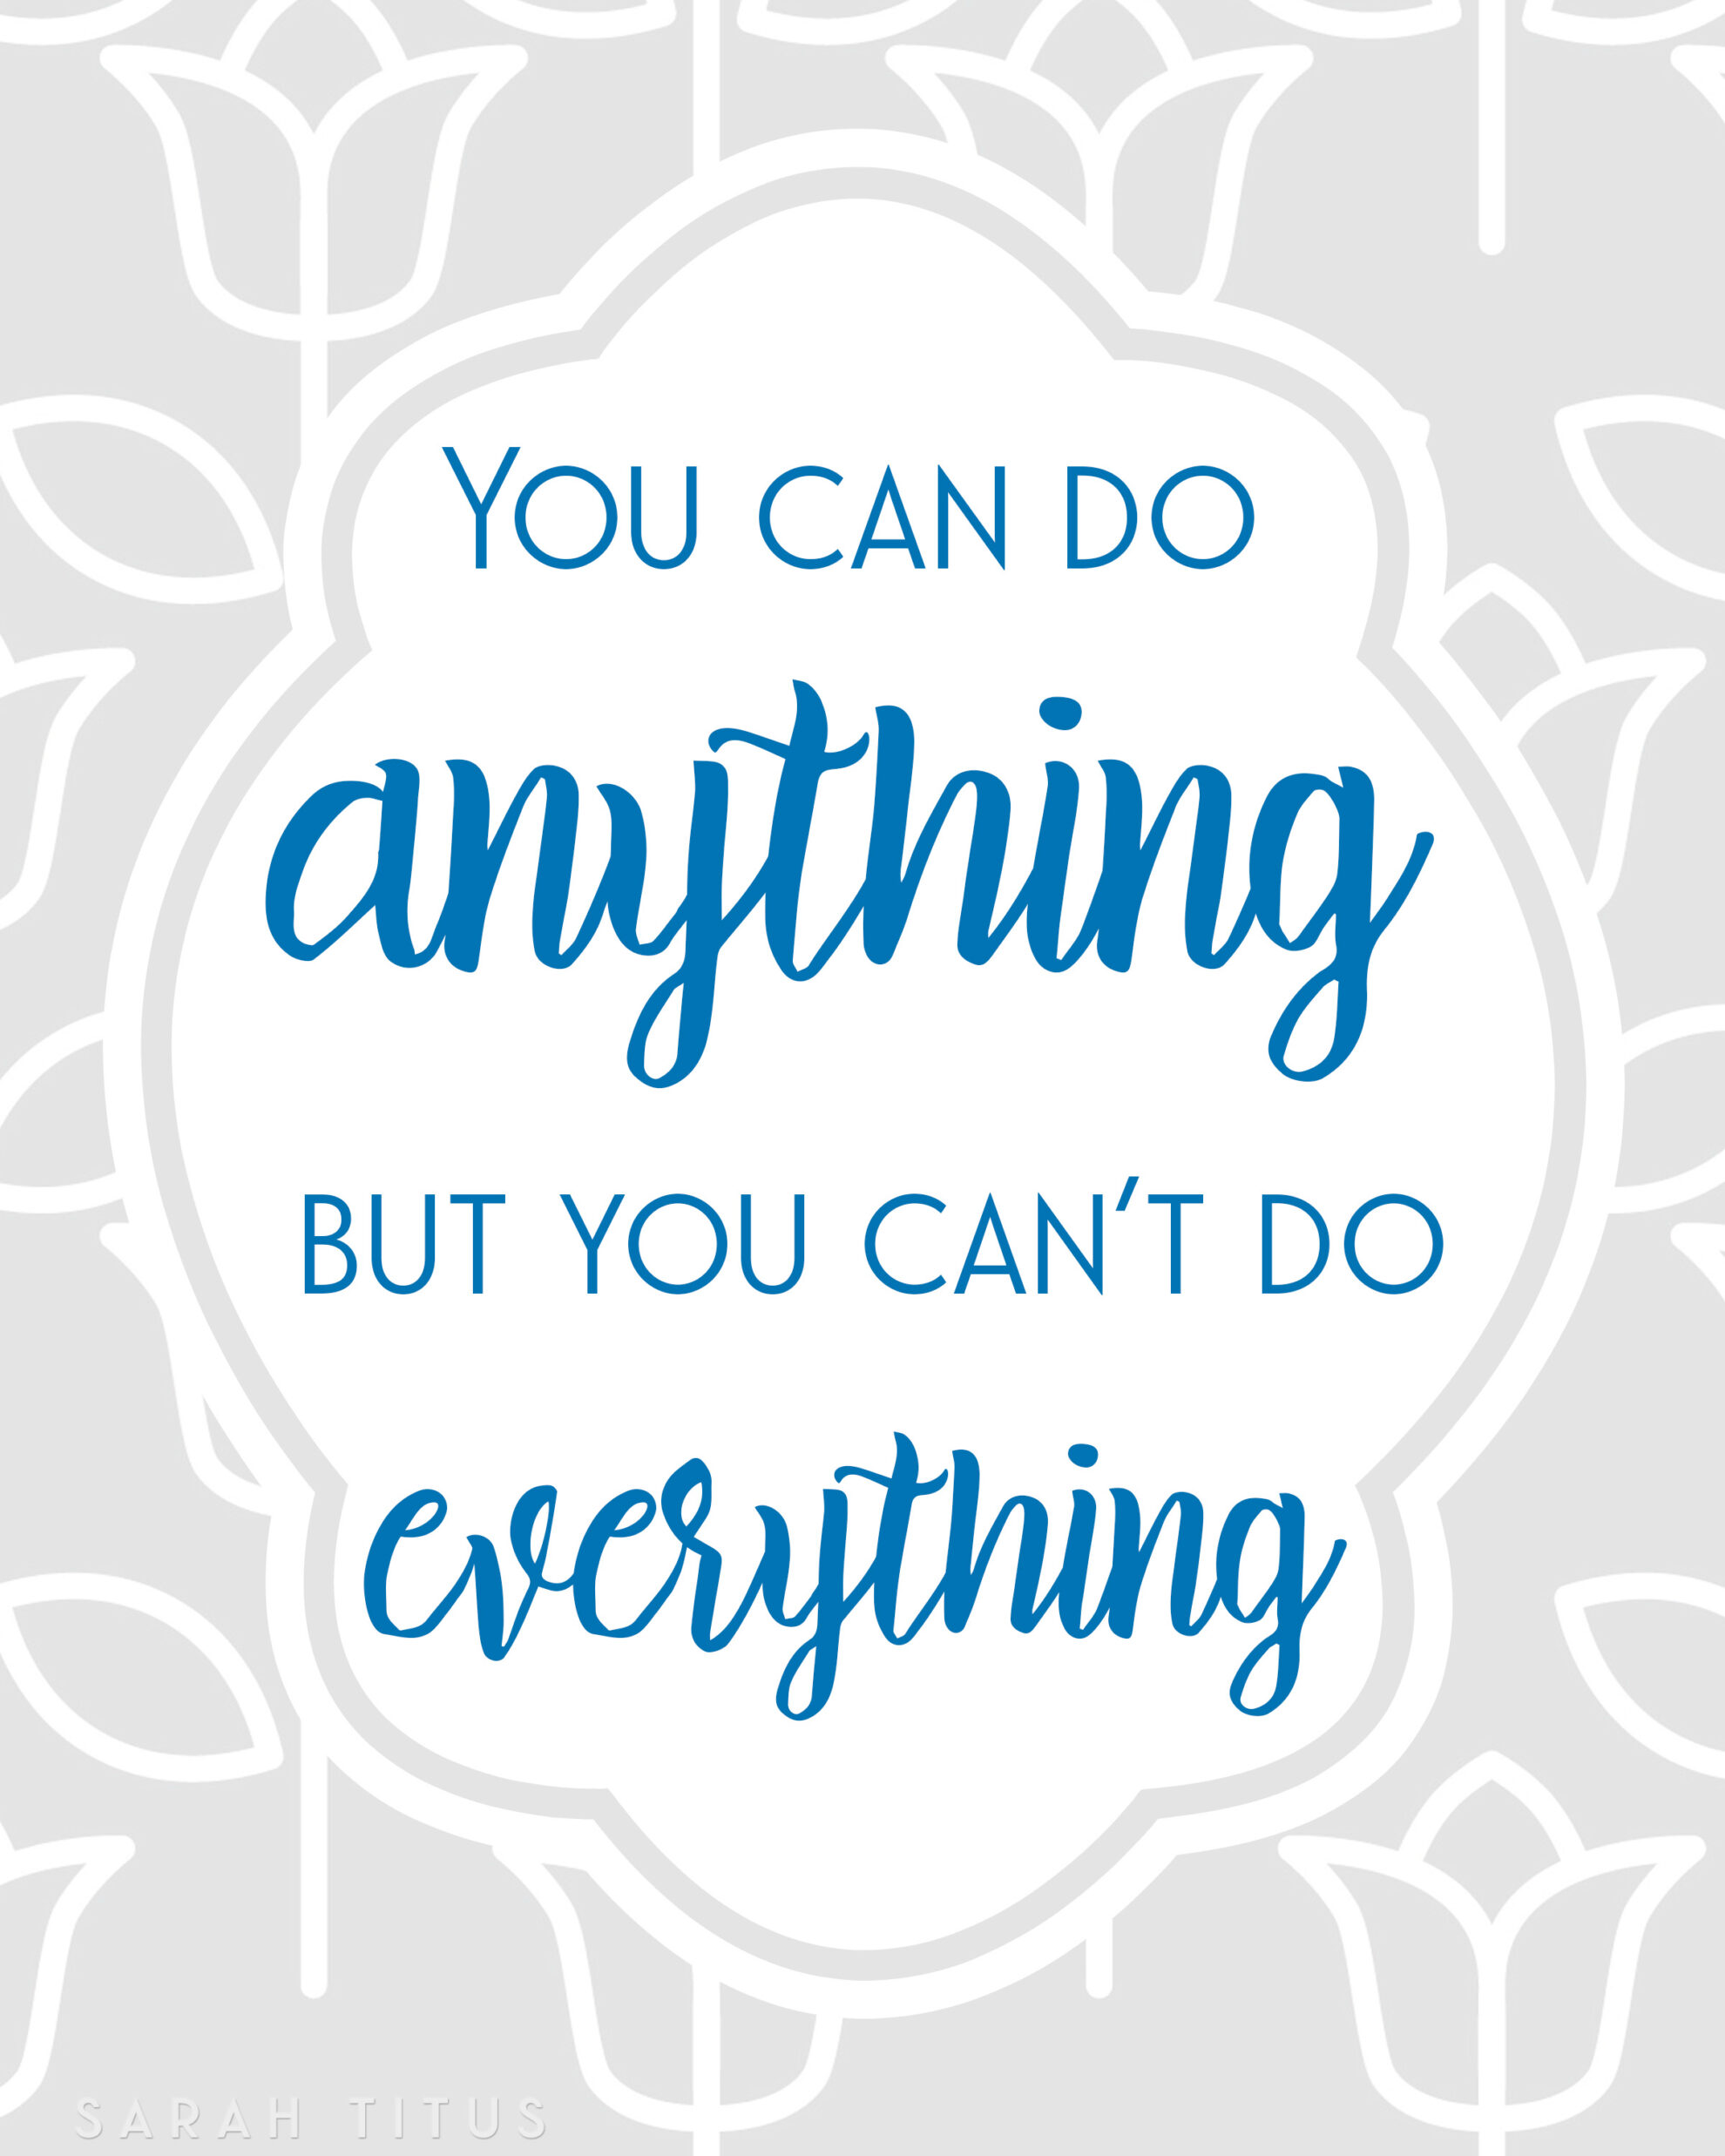 This Free Printable Wall Art reminds you: You can do anything, but you can't do everything at the same time! #freeprintable #freeprintablewallart #wallart 